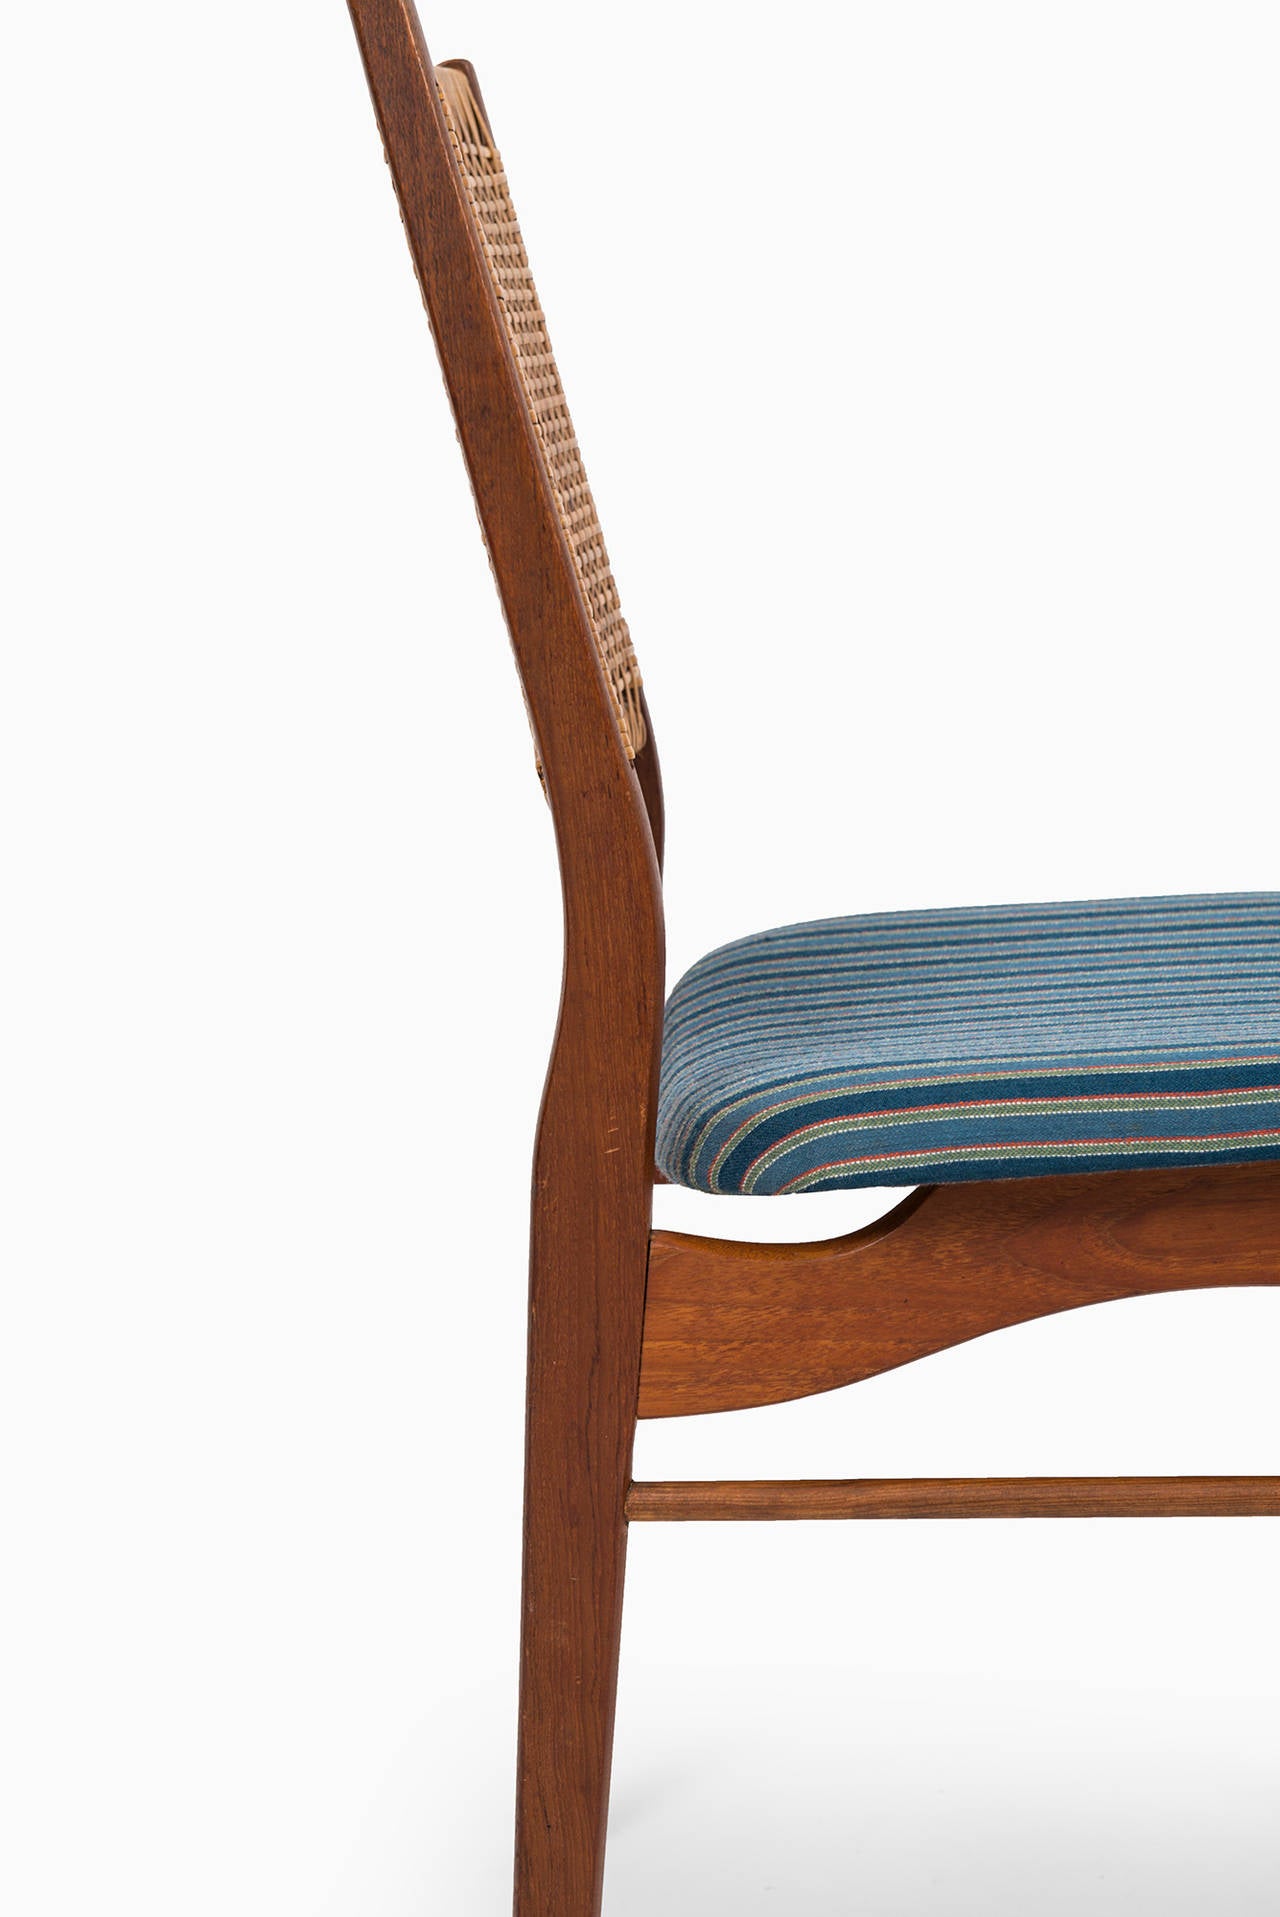 Woven Helge Sibast dining chairs model OS 2 by Sibast in Denmark